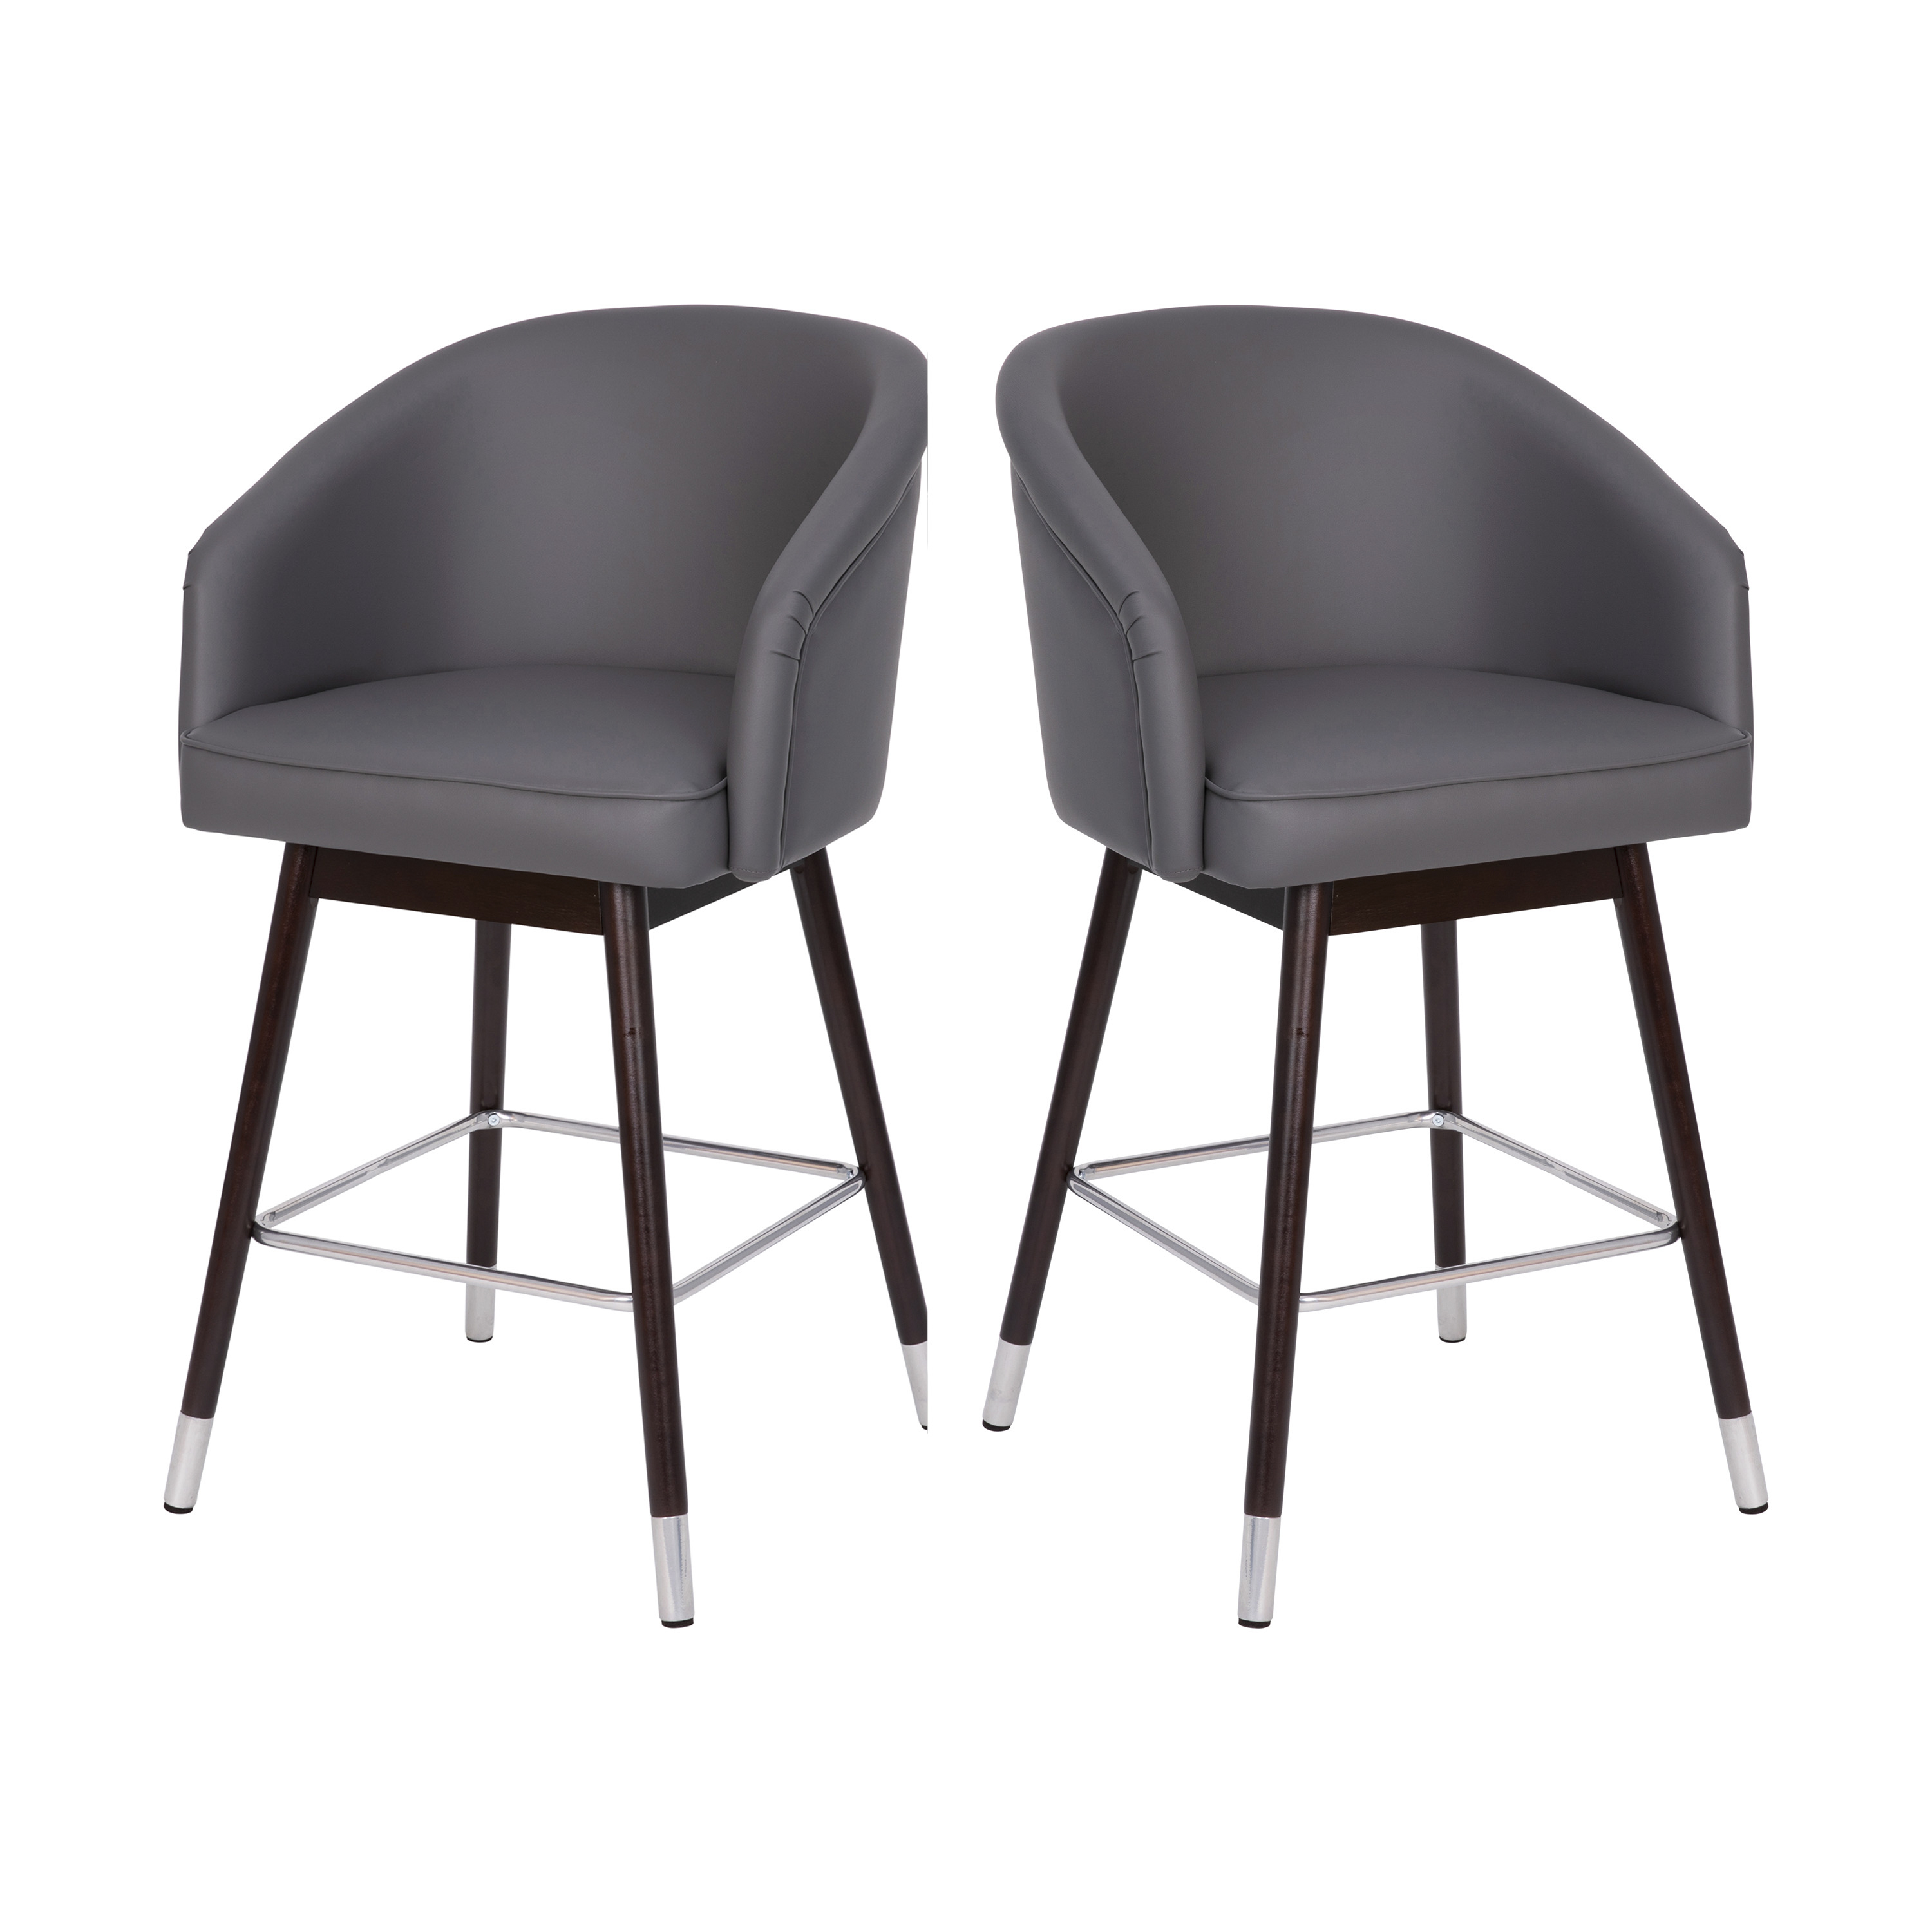 Flash Furniture 2-AY-1928-26-GY-GG Margo 26" Commercial Grade Mid-Back Gray LeatherSoft Modern Barstool with Beechwood Legs and Curved Back, Bronze Accents, Set of 2